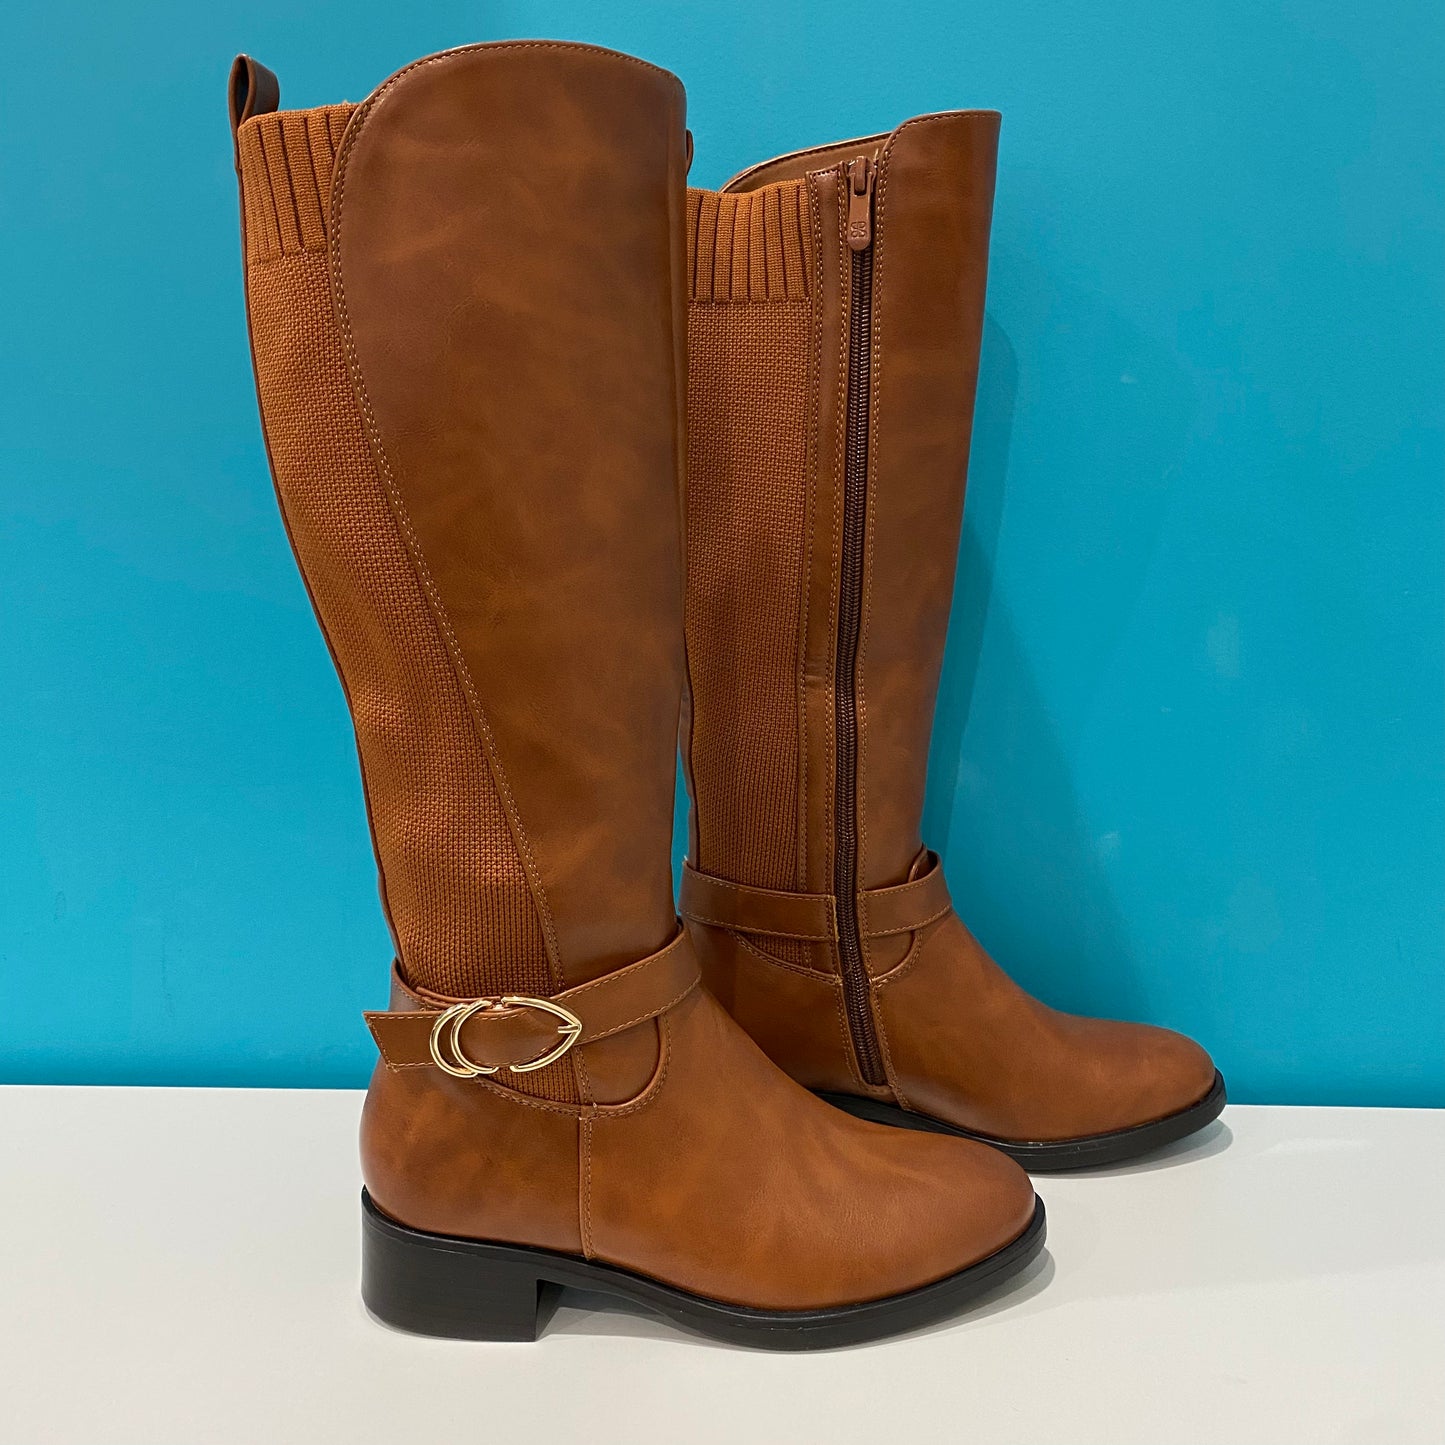 Bottes Lucie | CHC296 Camel